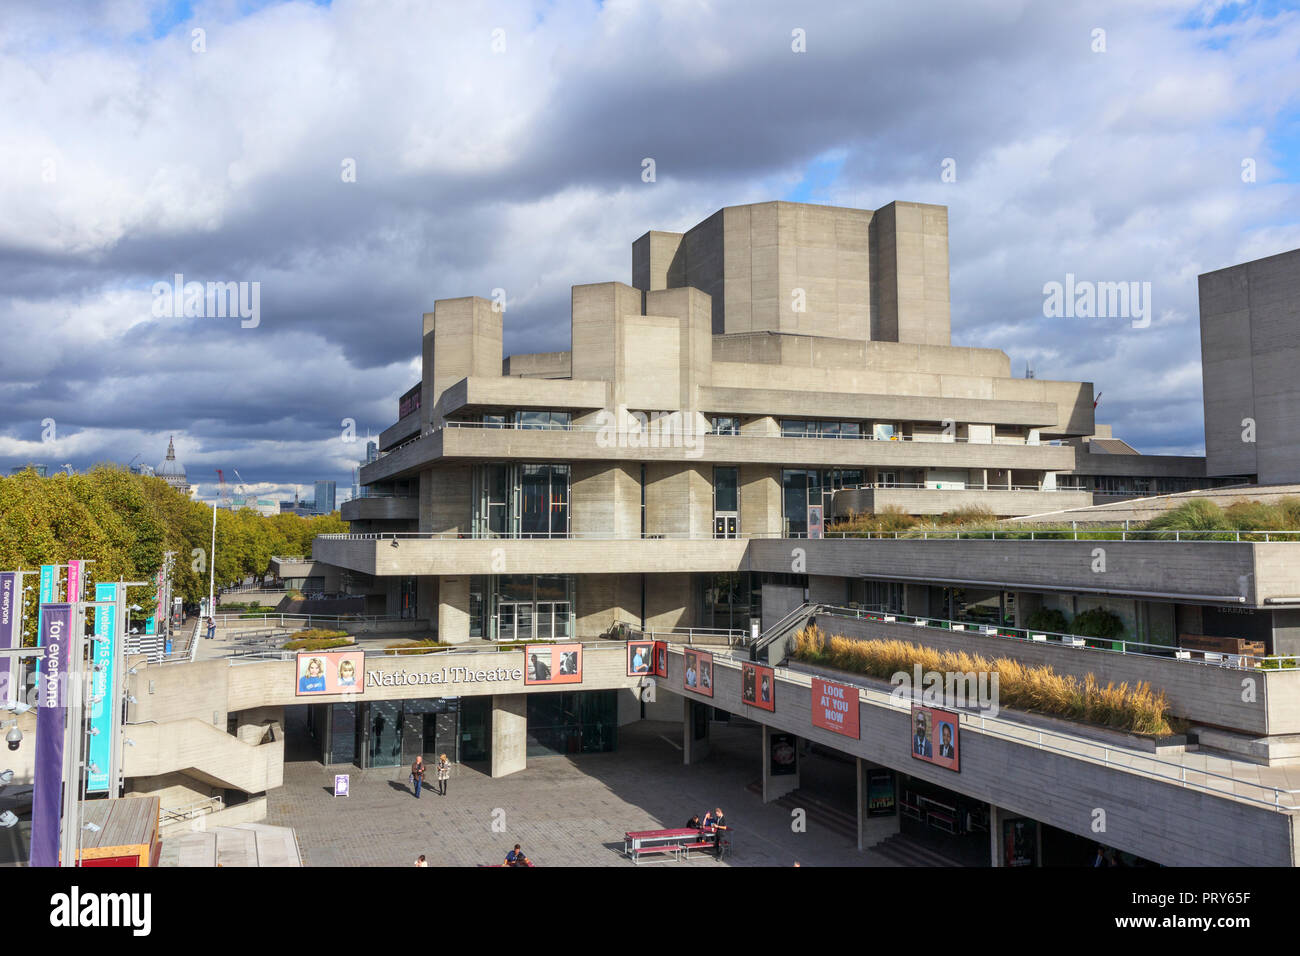 Royal National Theatre on the South Bank in Lambeth, London SE1, a prominent publicly funded performing arts venue, viewed from Waterloo Bridge Stock Photo